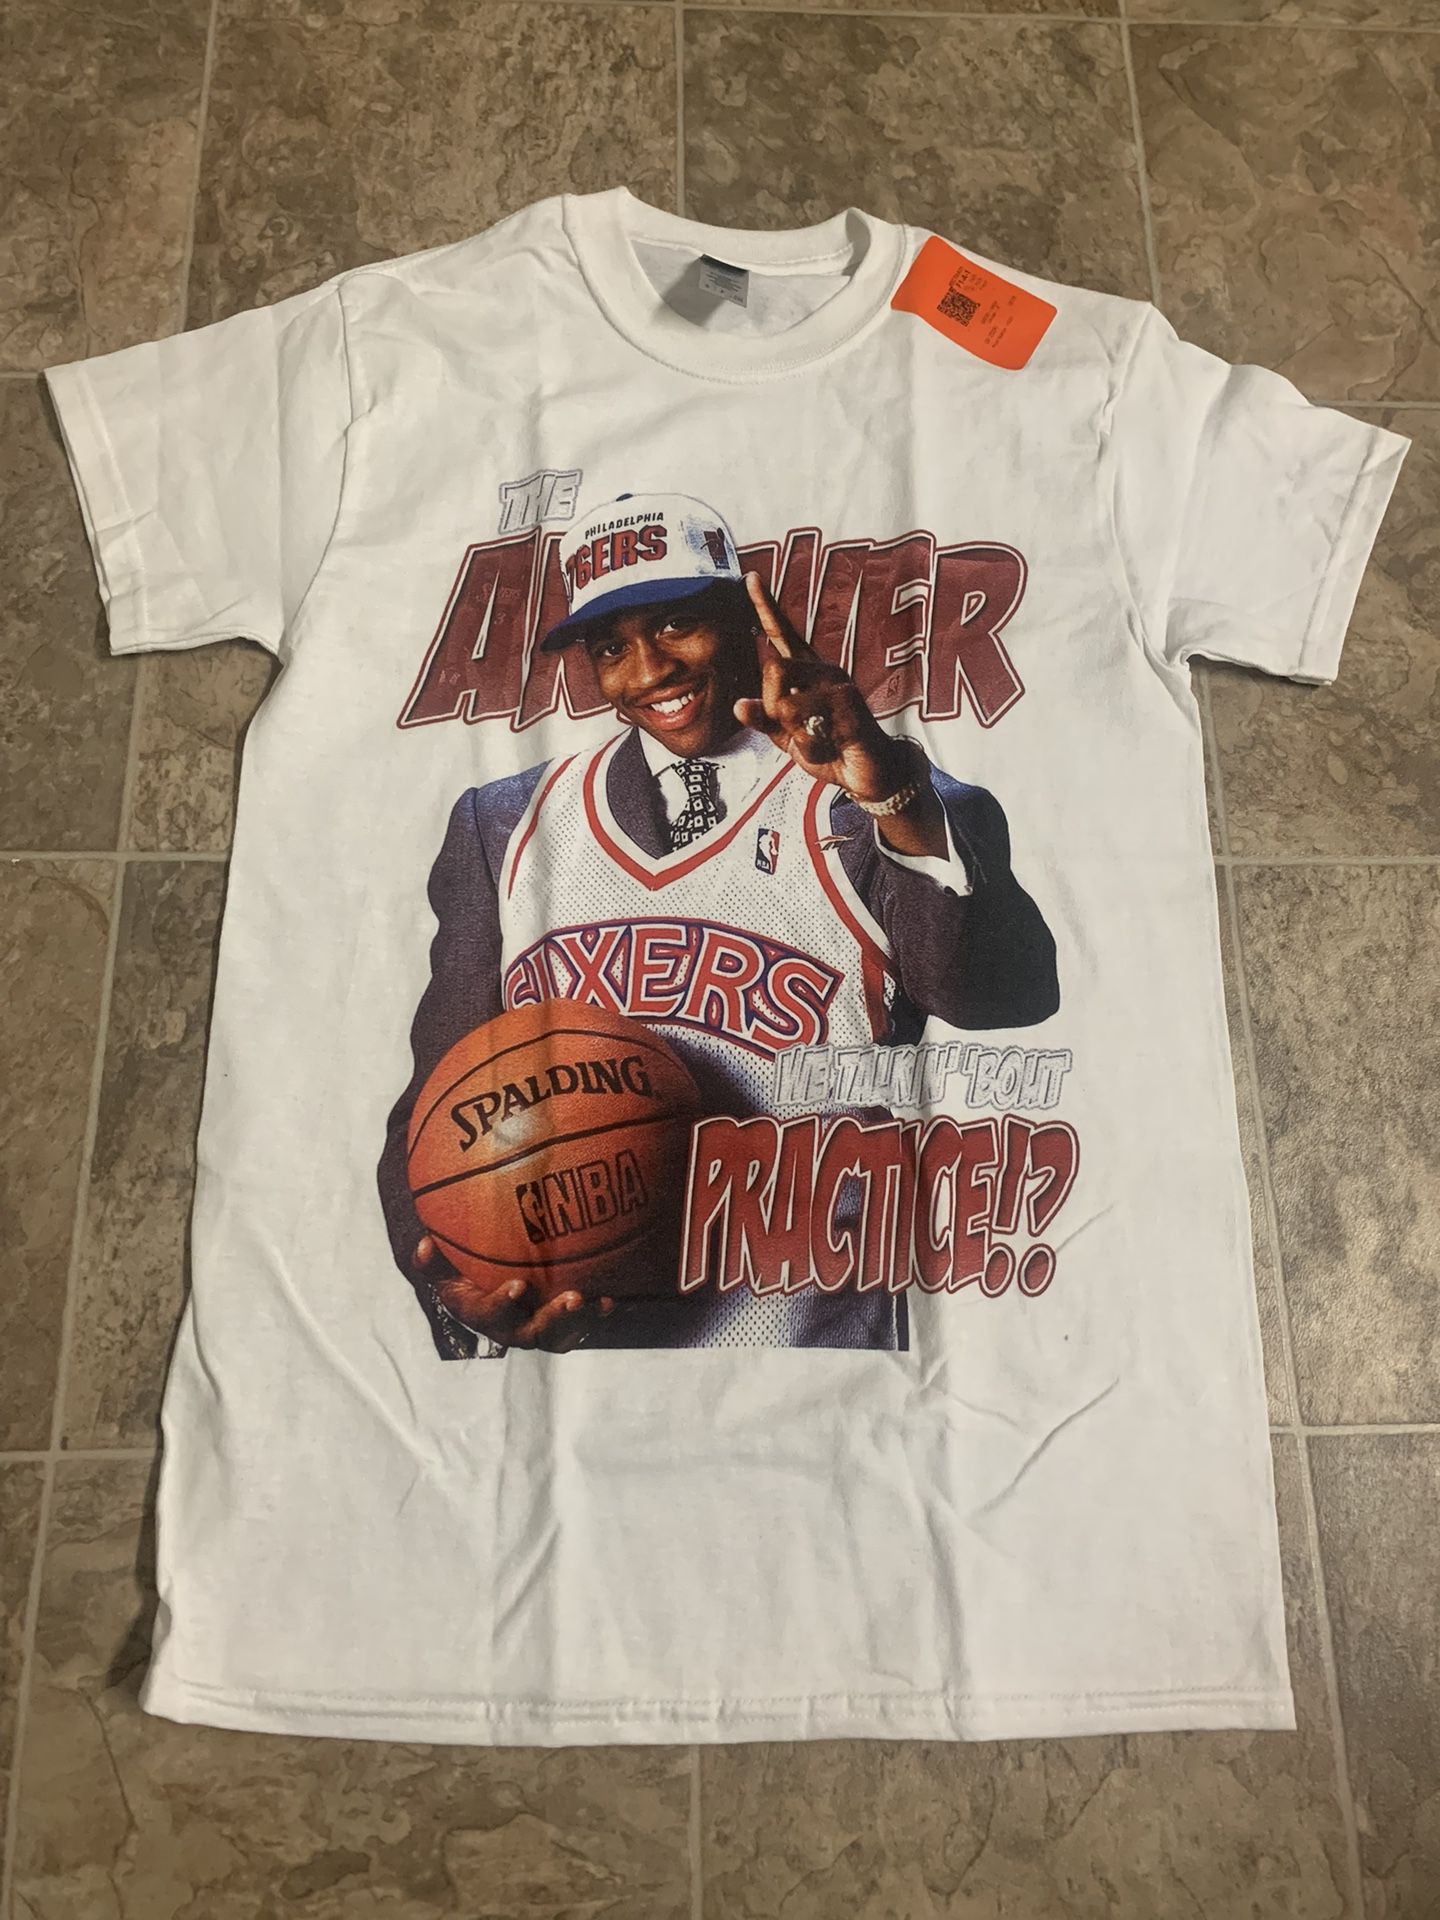 Brand New Allen iverson “The Answer” Graphic Tee